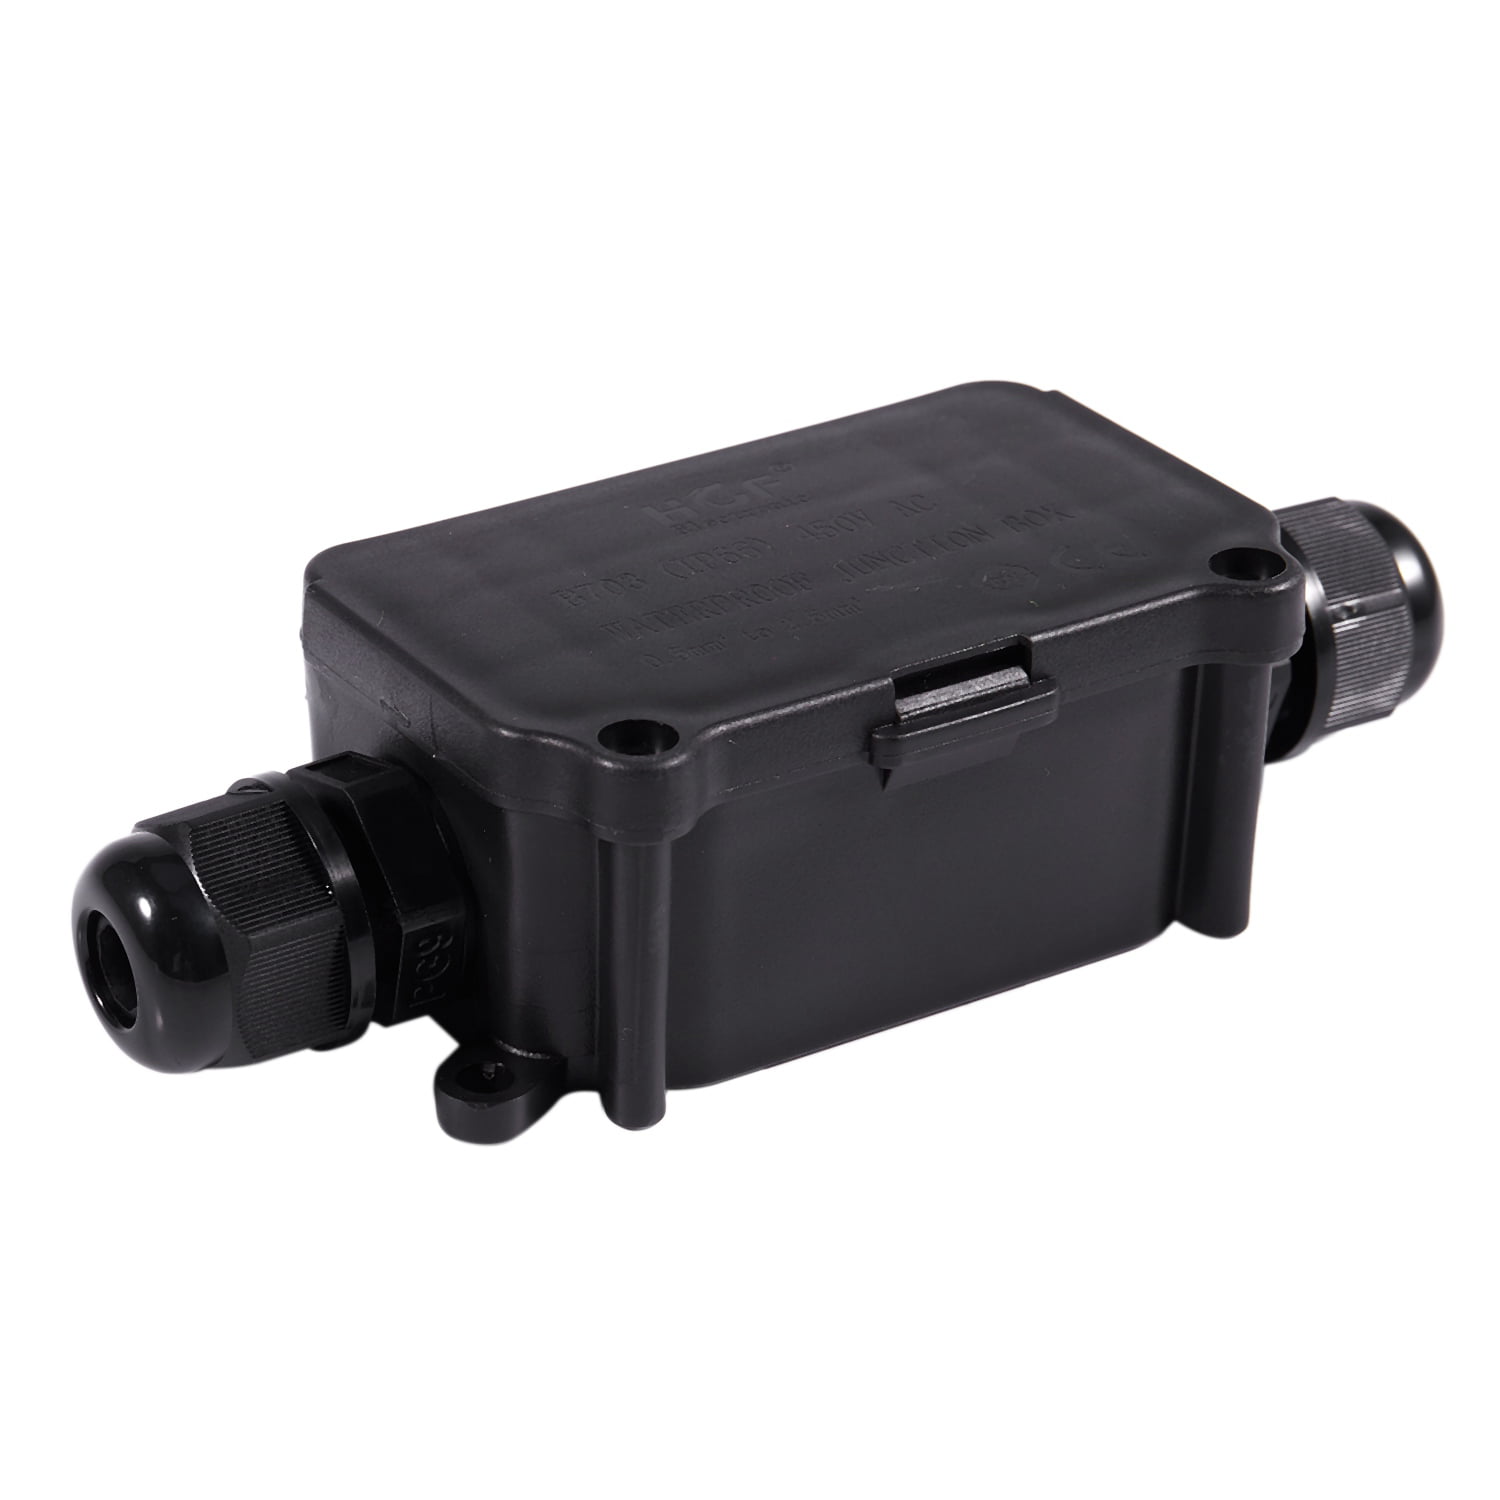 IP65 Waterproof Outdoor 2 Way PG9 Gland Electrical Junction Box Black Creative and Useful Ogquaton Junction Box